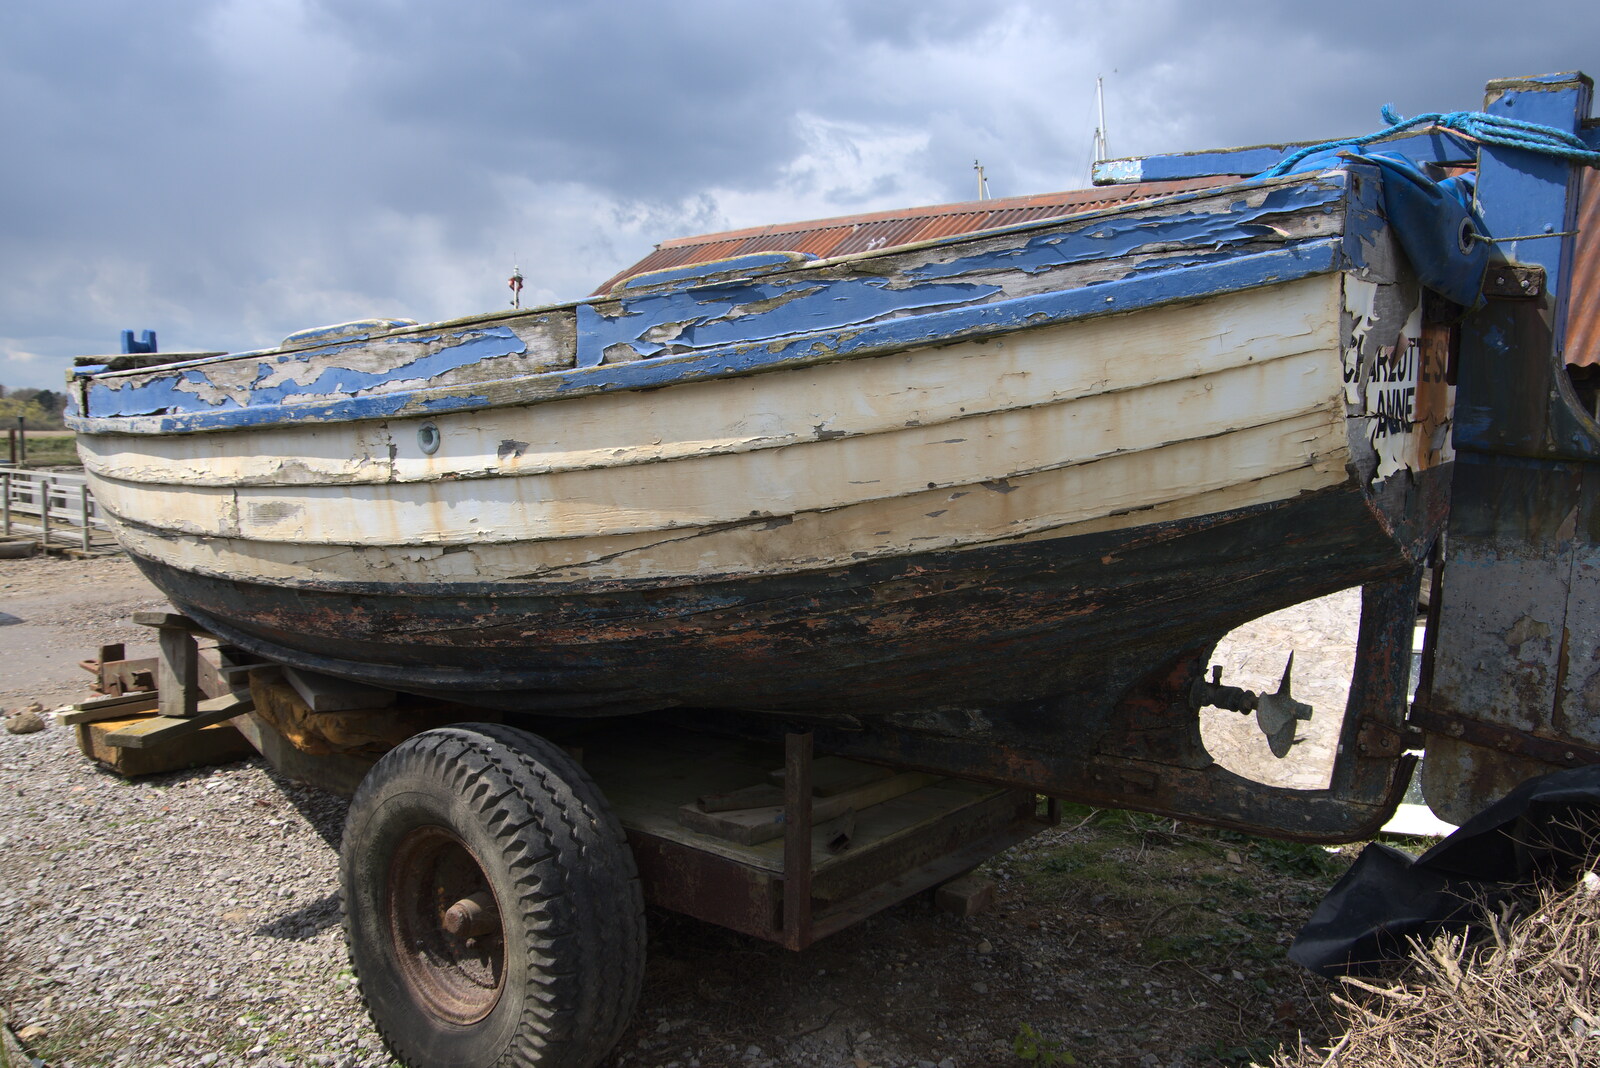 Peeling paint on Charlotte Anne from A Chilly Trip to the Beach, Southwold Harbour, Suffolk - 2nd May 2021